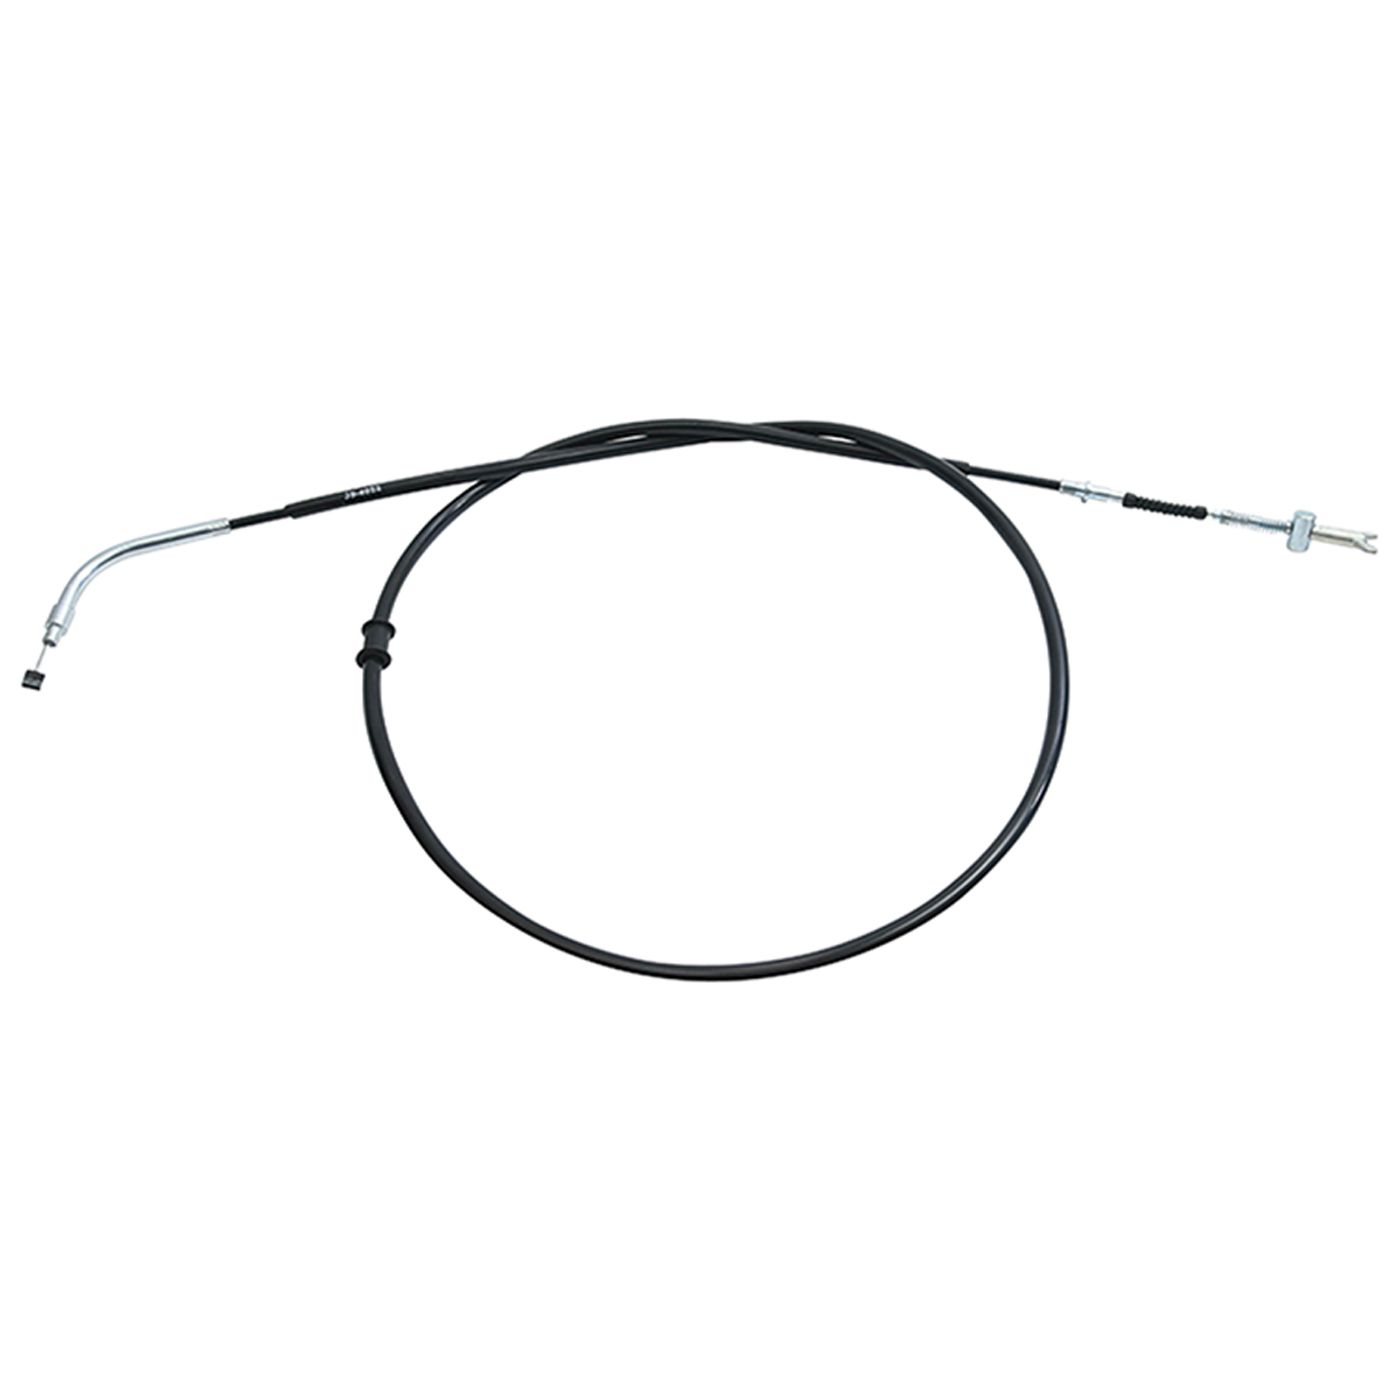 Wrp Brake Cables - WRP454042 image